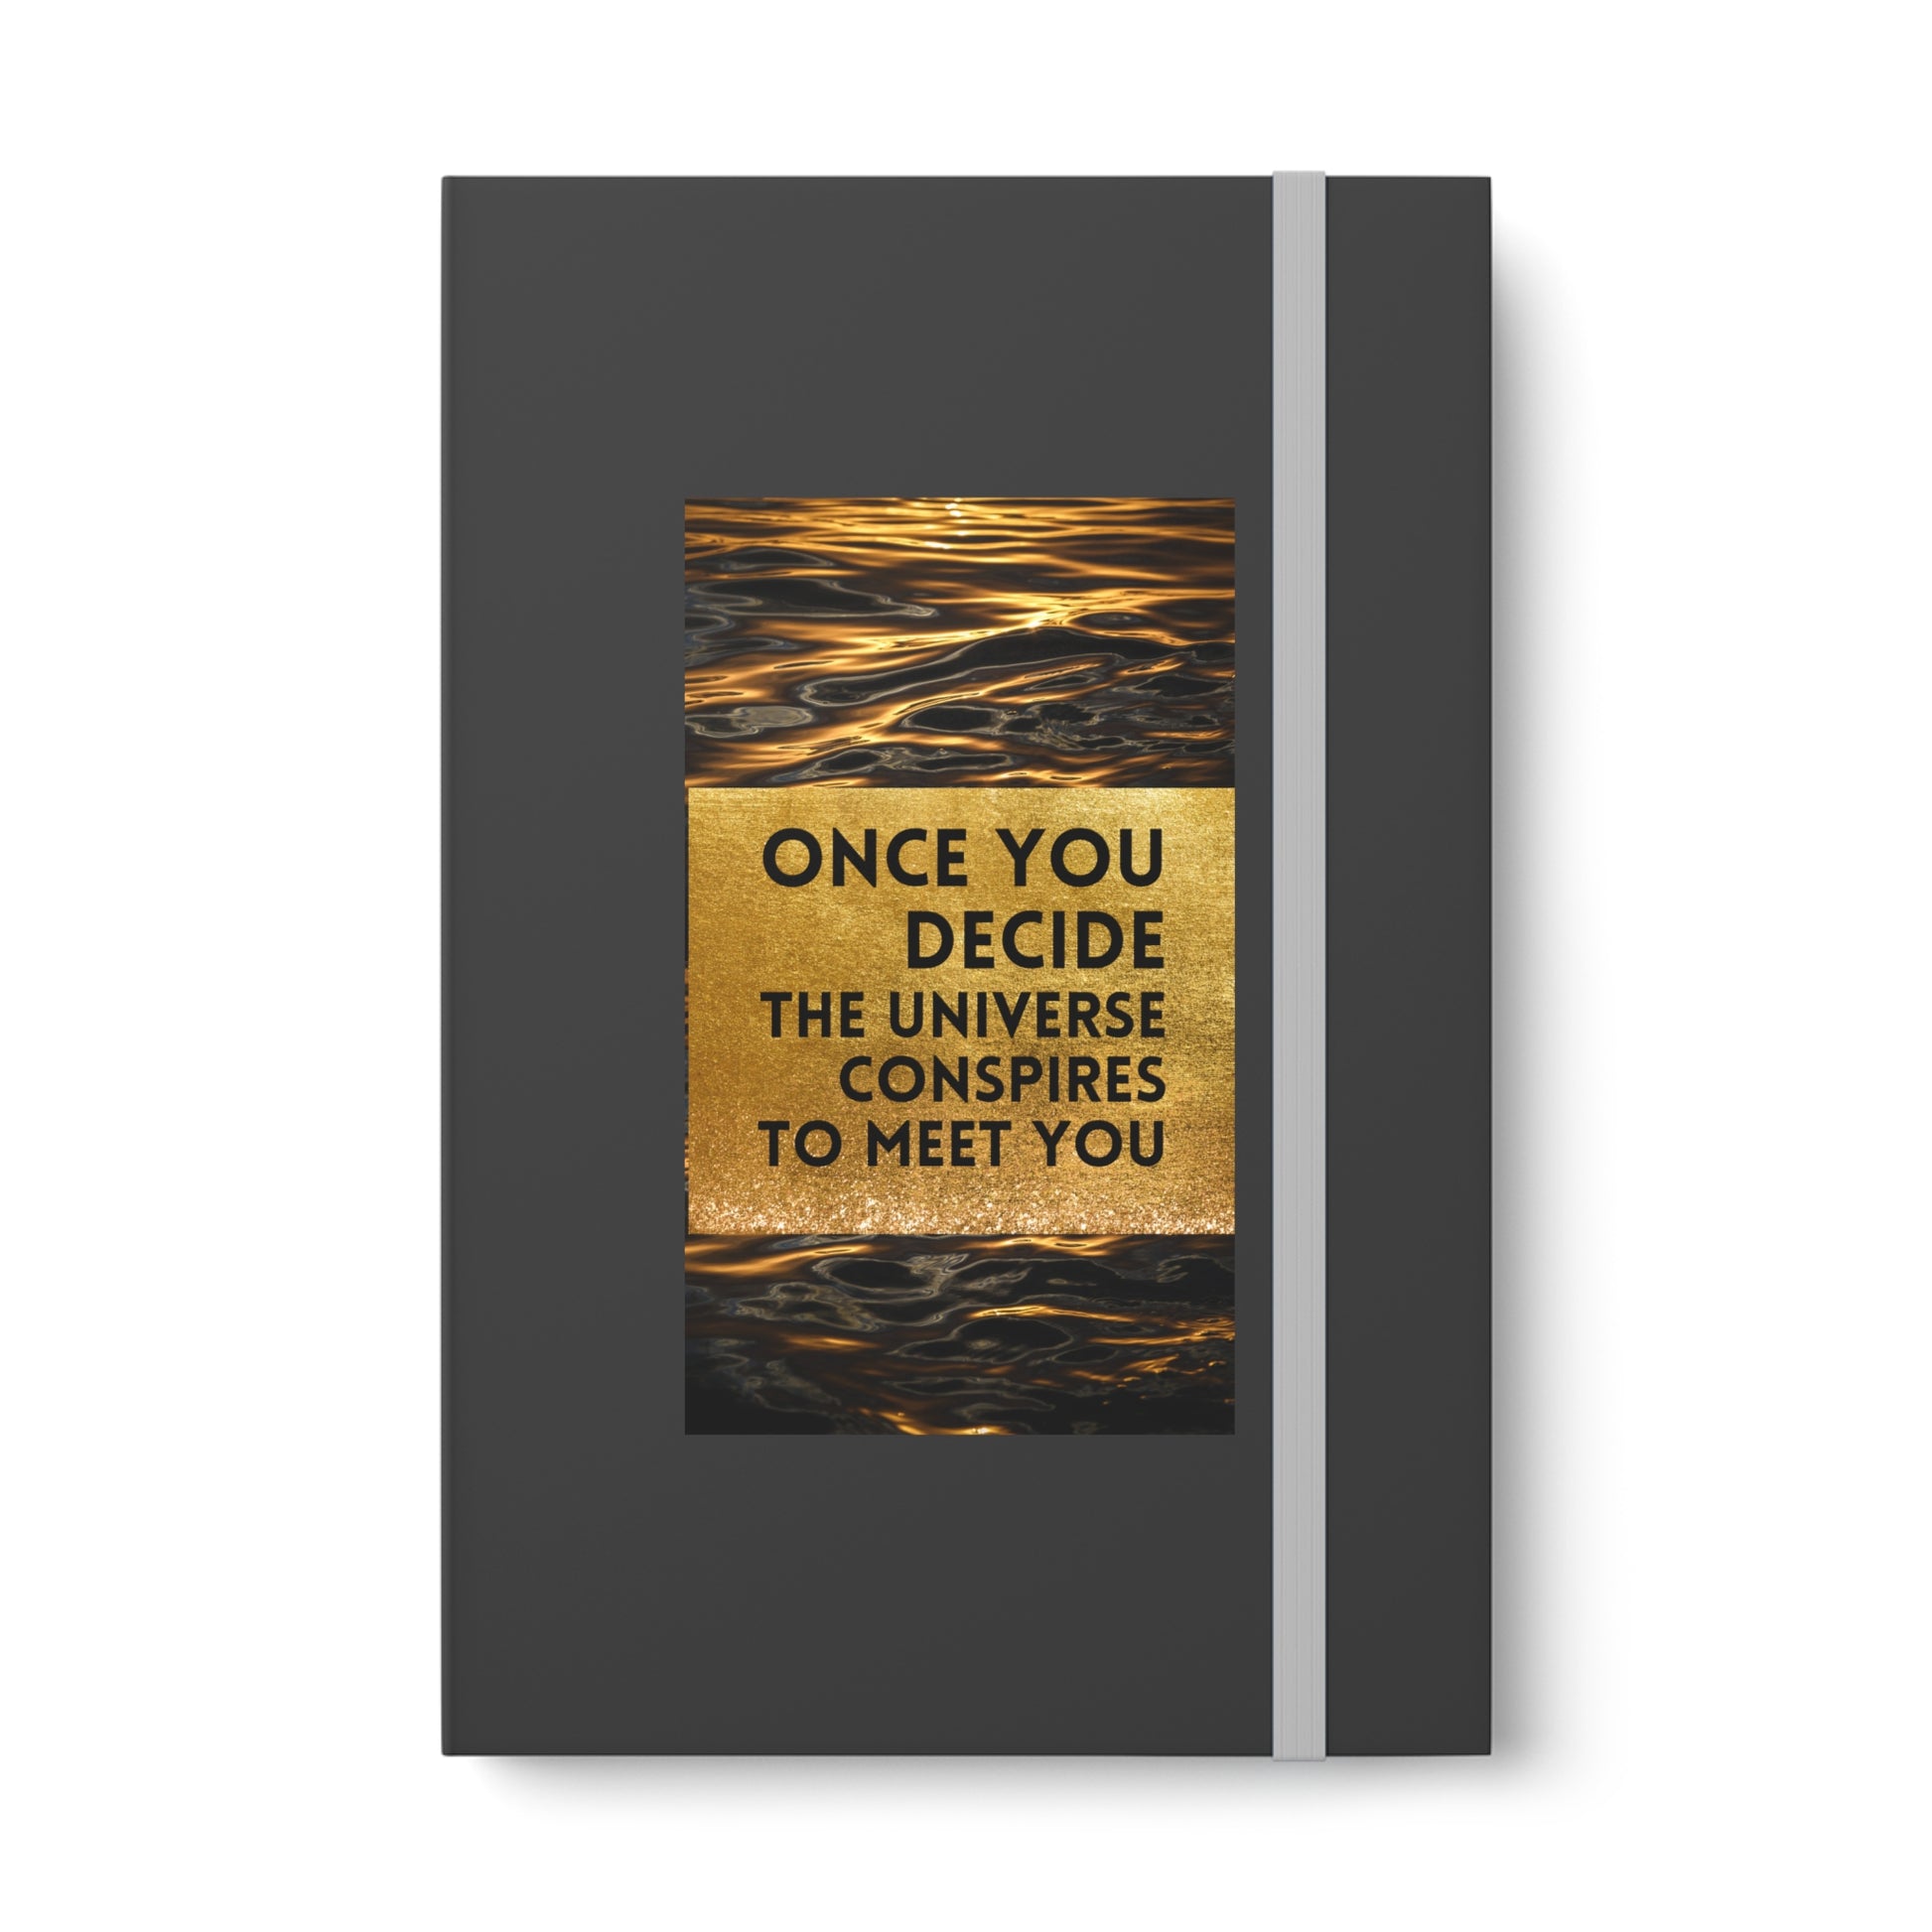 "Once You Decide, The Universe Aligns" - Spiral Notebook for Dreamers and Doers - 689 Designs